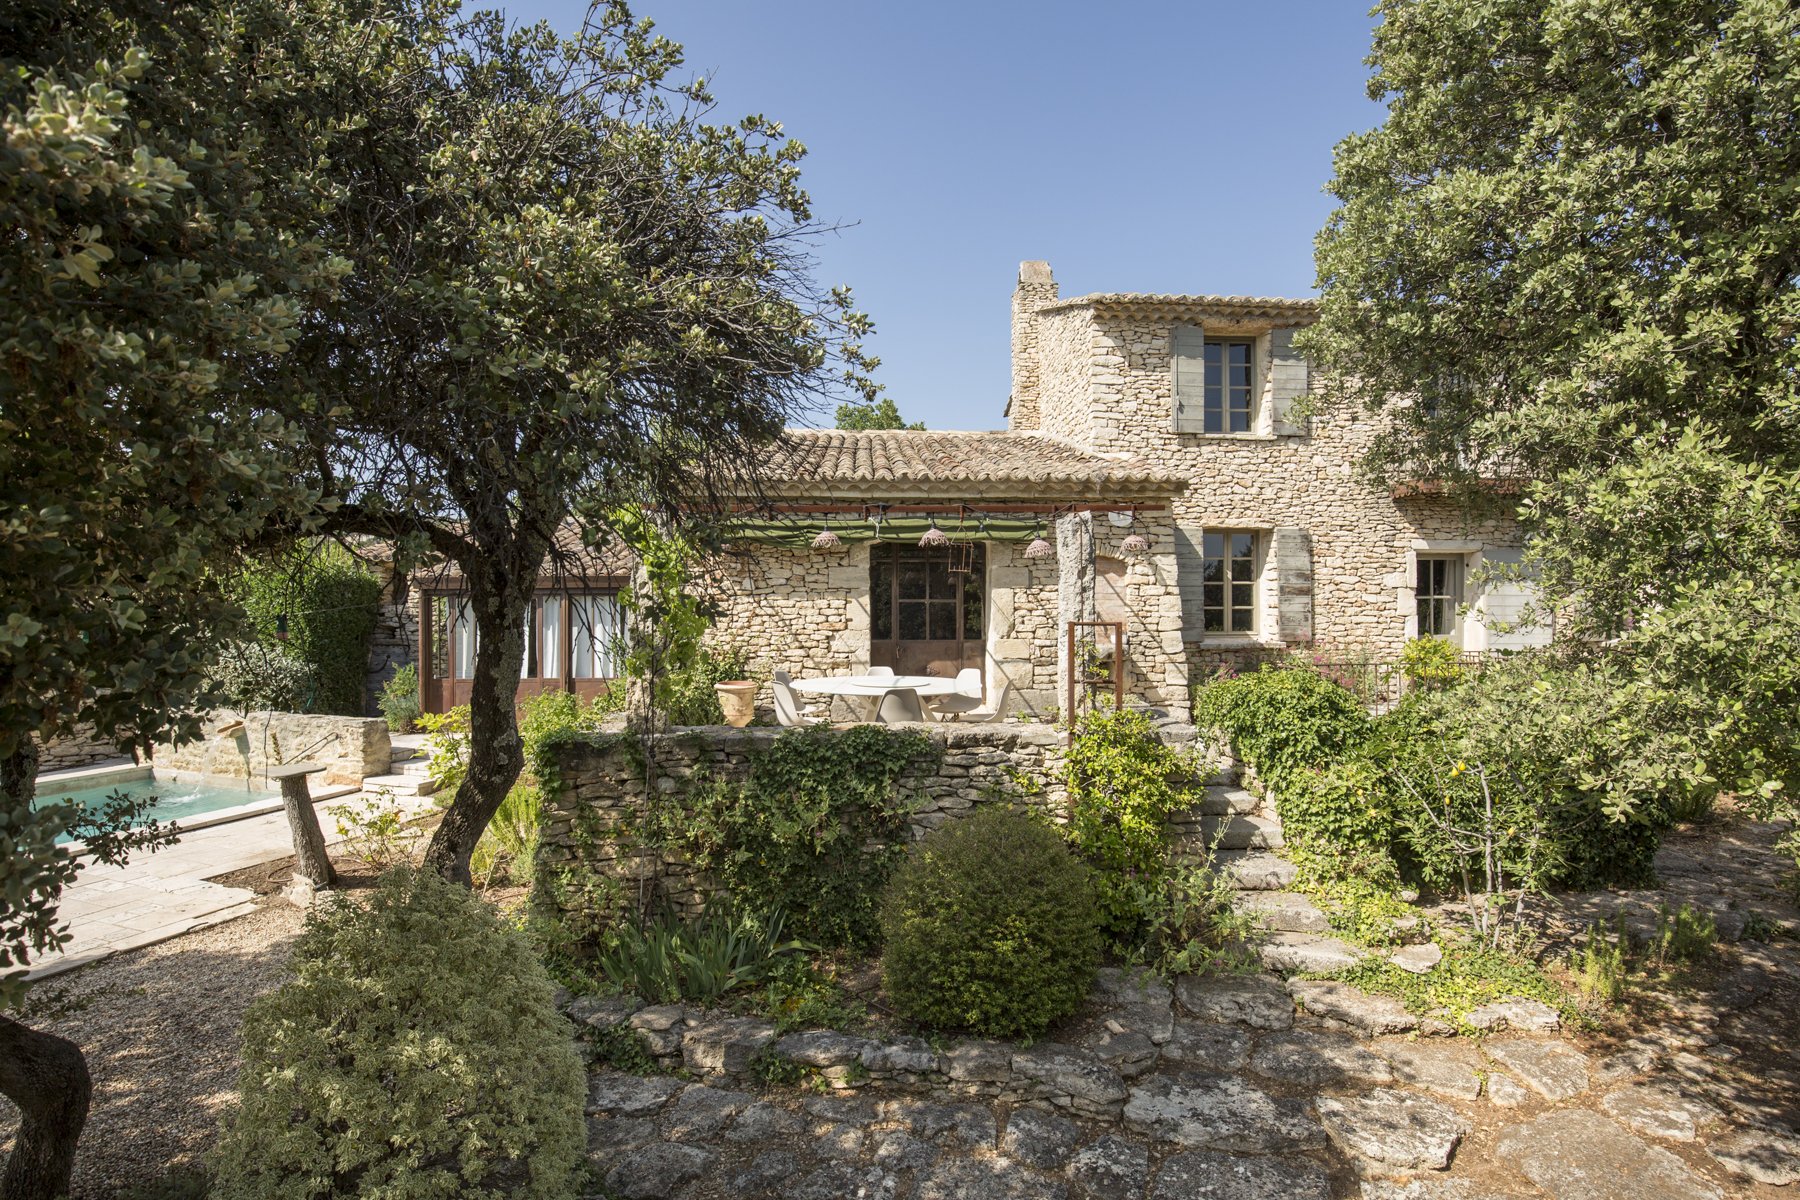 Francis York  Charming Stone House in the Provencal Village of Gordes, France  00008.jpg